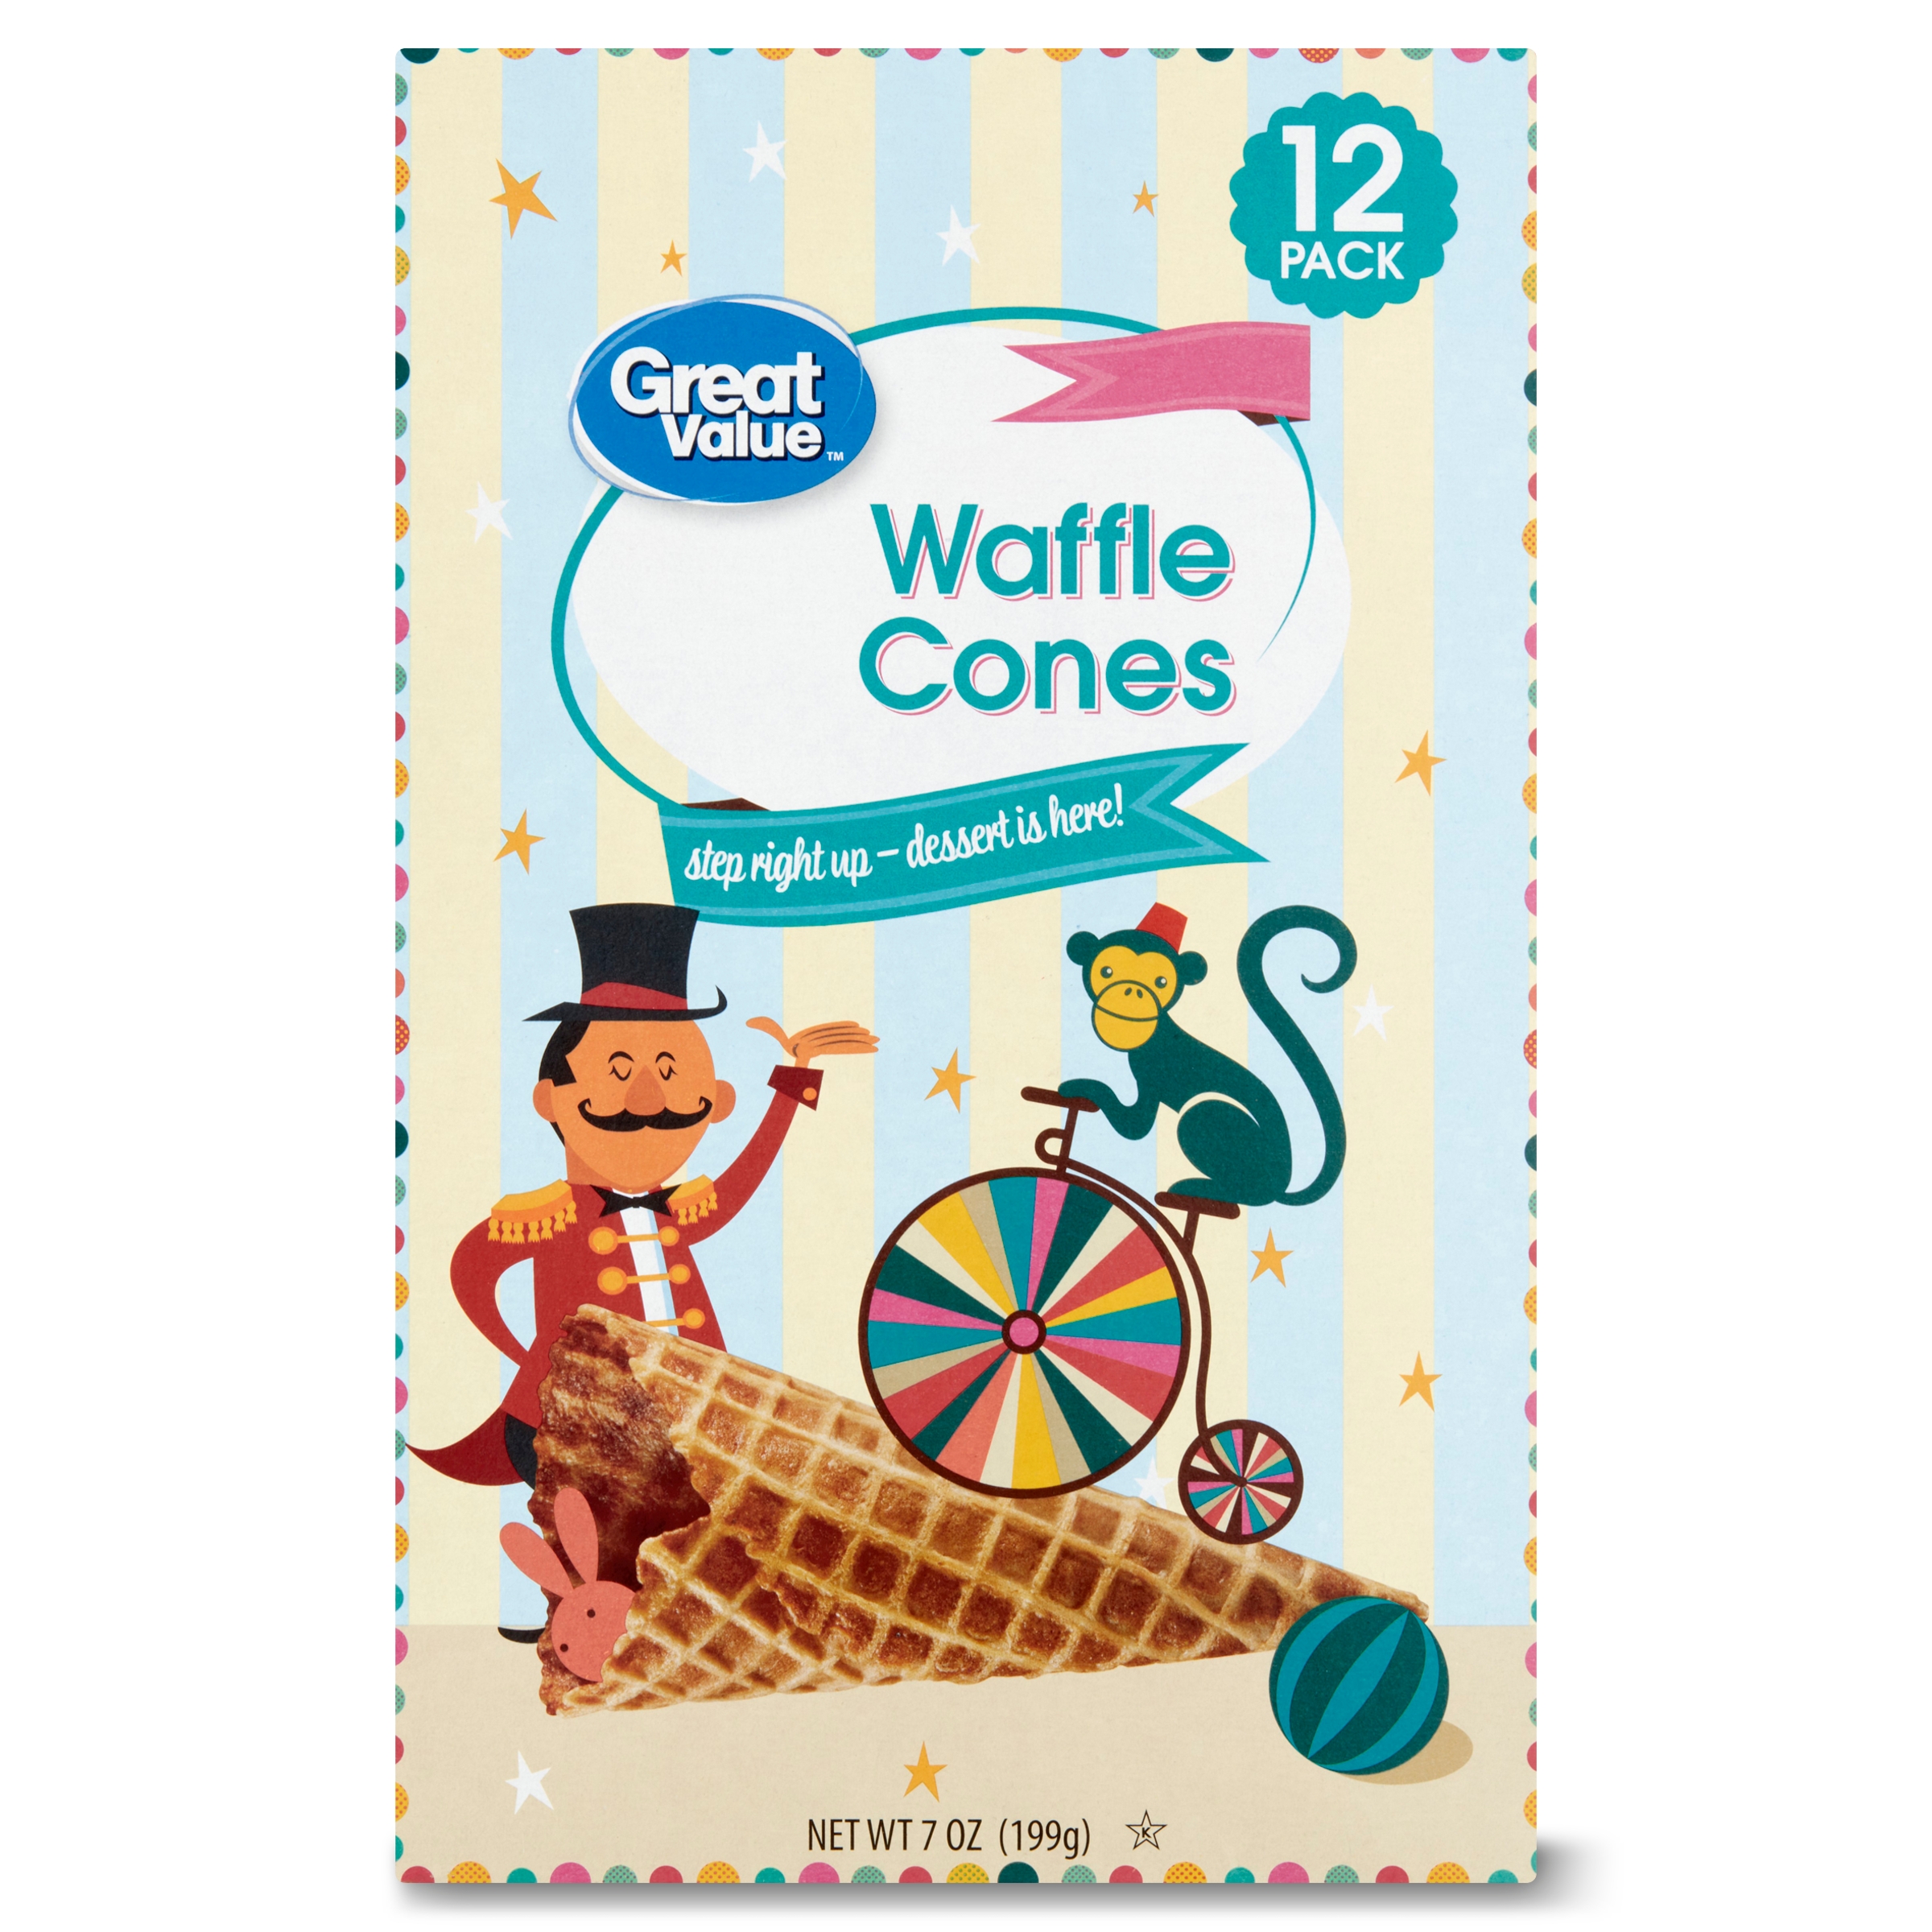 Great Value Waffles Cones, 7 oz, 12 Count - image 1 of 7